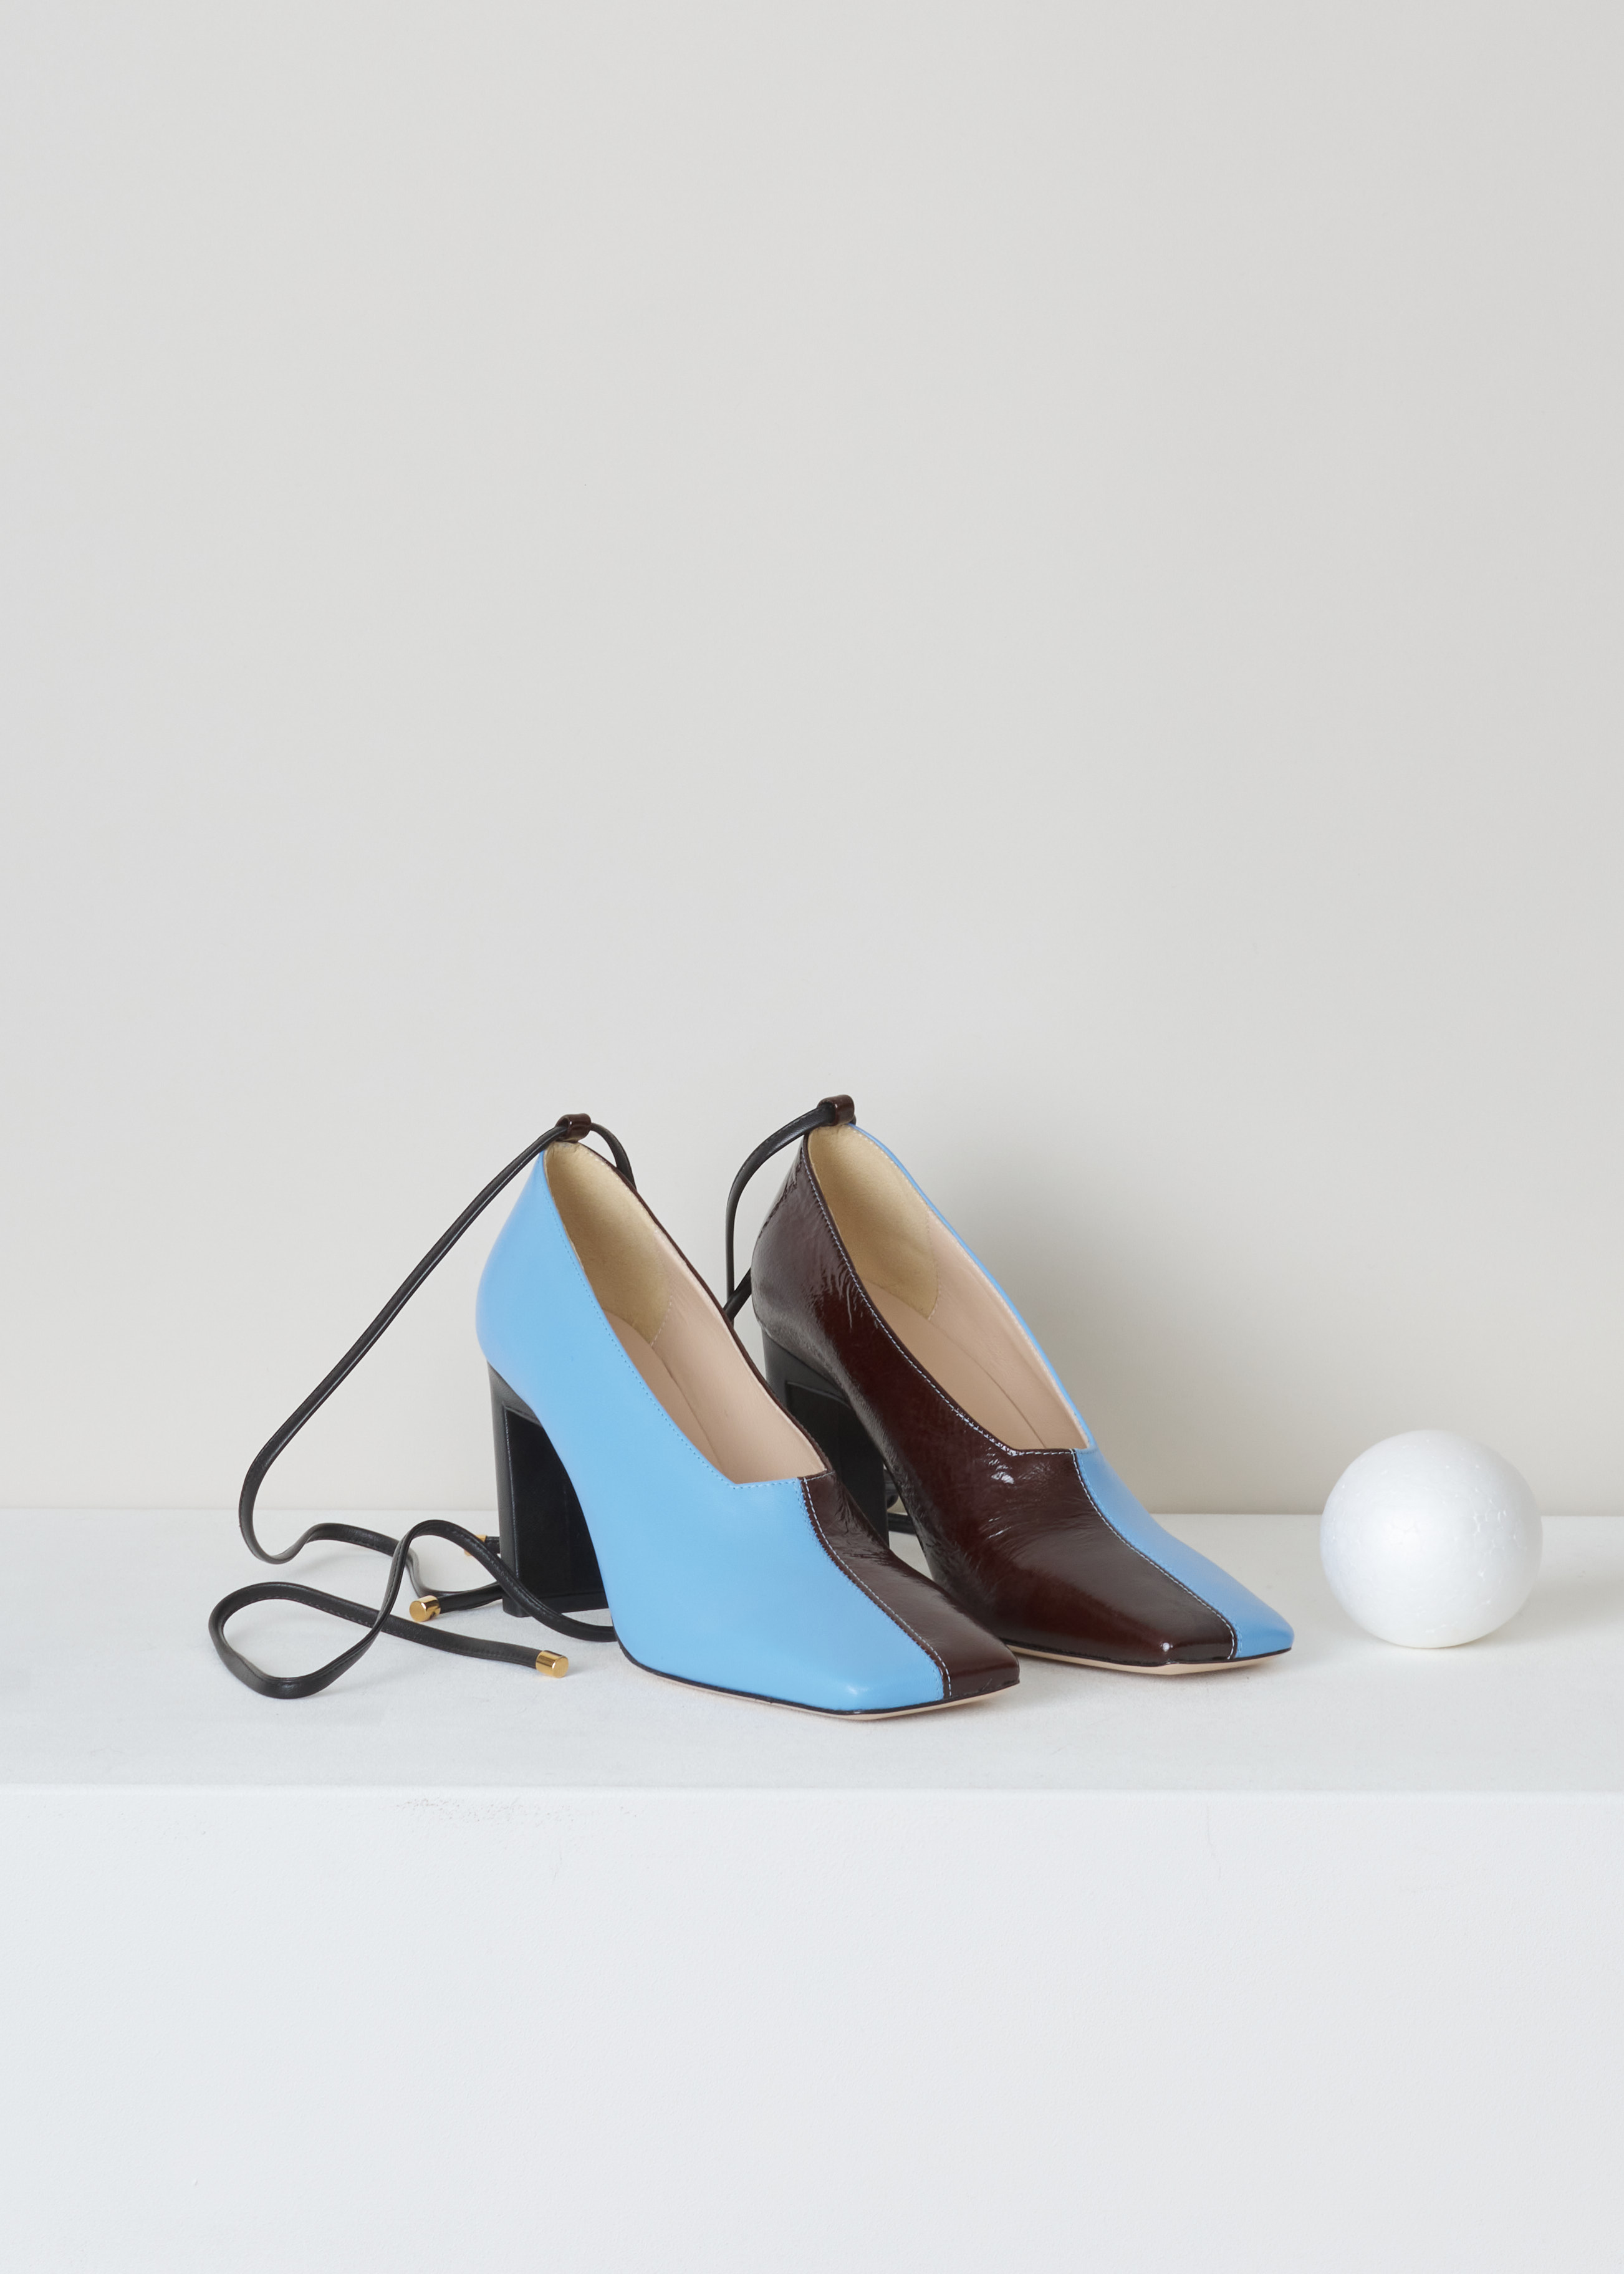 Wandler Isa mule ISA_MULE_RAISIN_MIX raisin mix front. Isa mule in raisin mix with a bold architectural shape, a chic square toe, half blue, half brown. It has a wrap tie ankle fastening and high block heel.

Heel height: 8.5 cm / 3.4 inch.